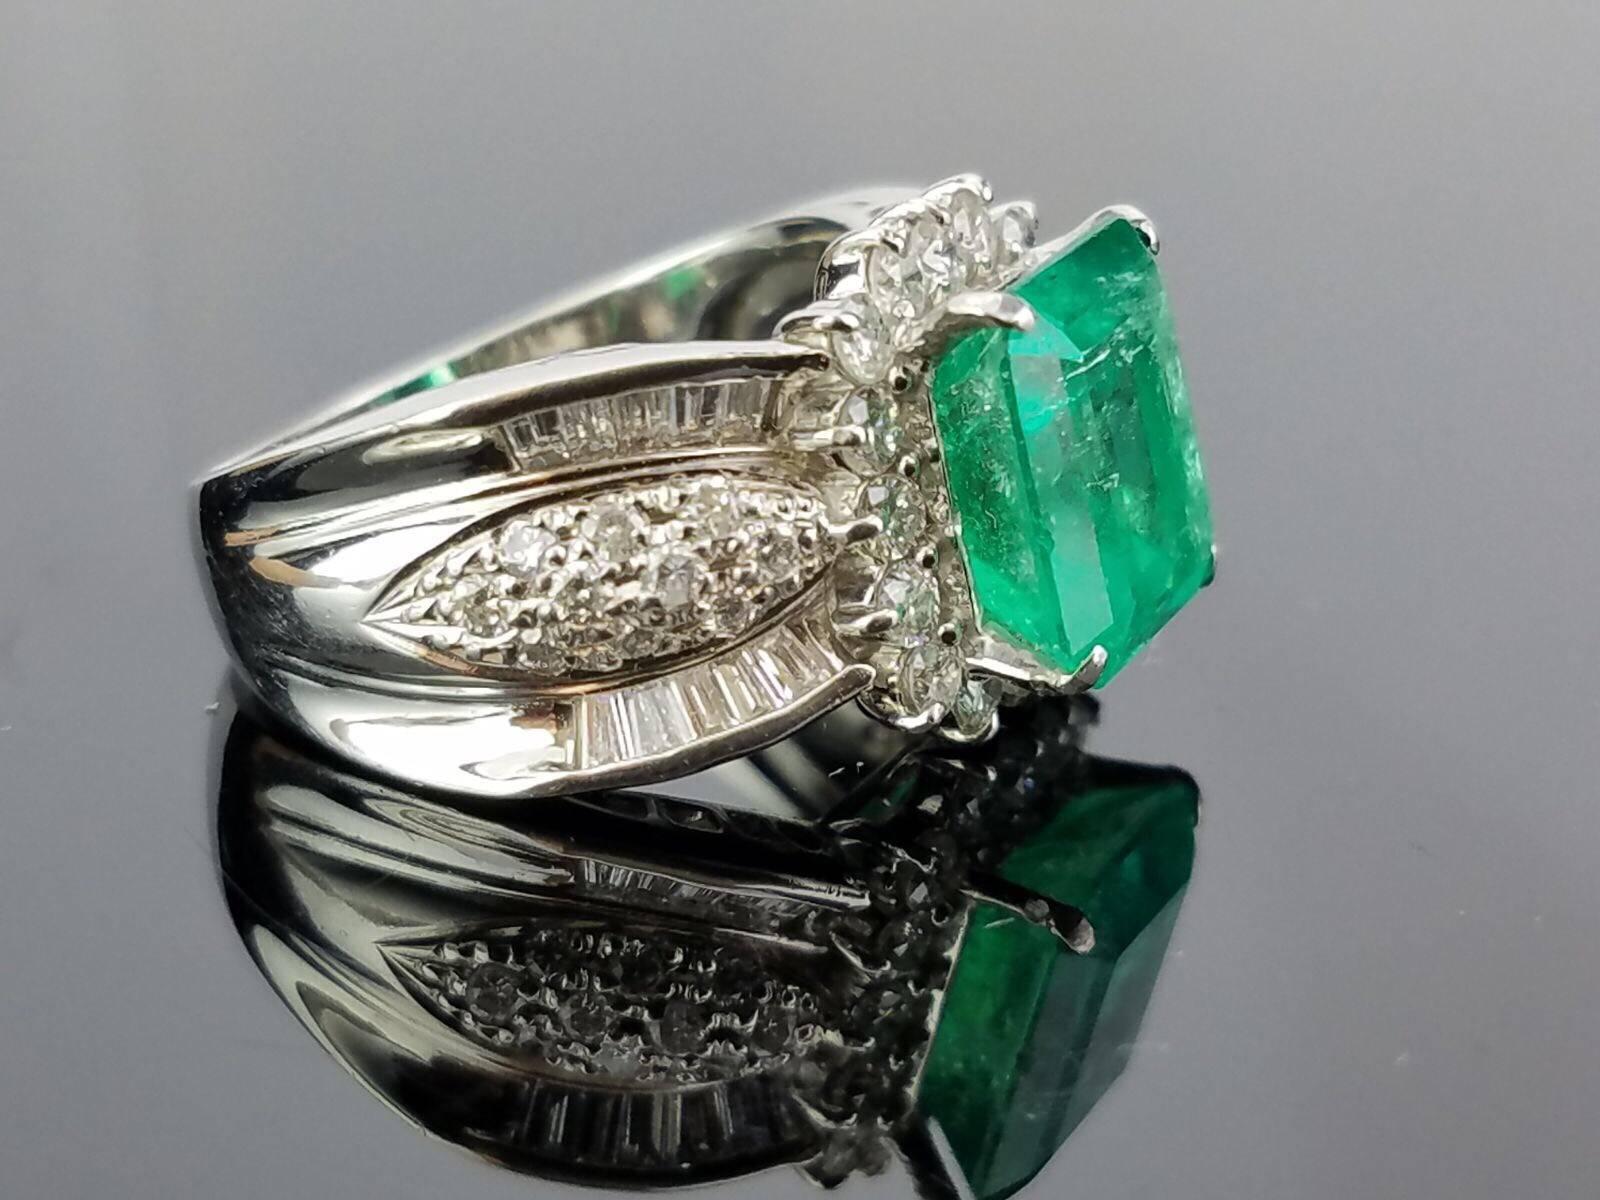 Beautiful Colombian Emerald surrounded by Diamond cocktail ring, all set in Platinum.

Stone Details: 
Stone: Colombian Emerald
Cut: Emerald shape
Carat Weight: 3.31 Carat

Diamond Details:
Cut: Brilliant cut/Baguettes
Total Carat Weight: 1.12